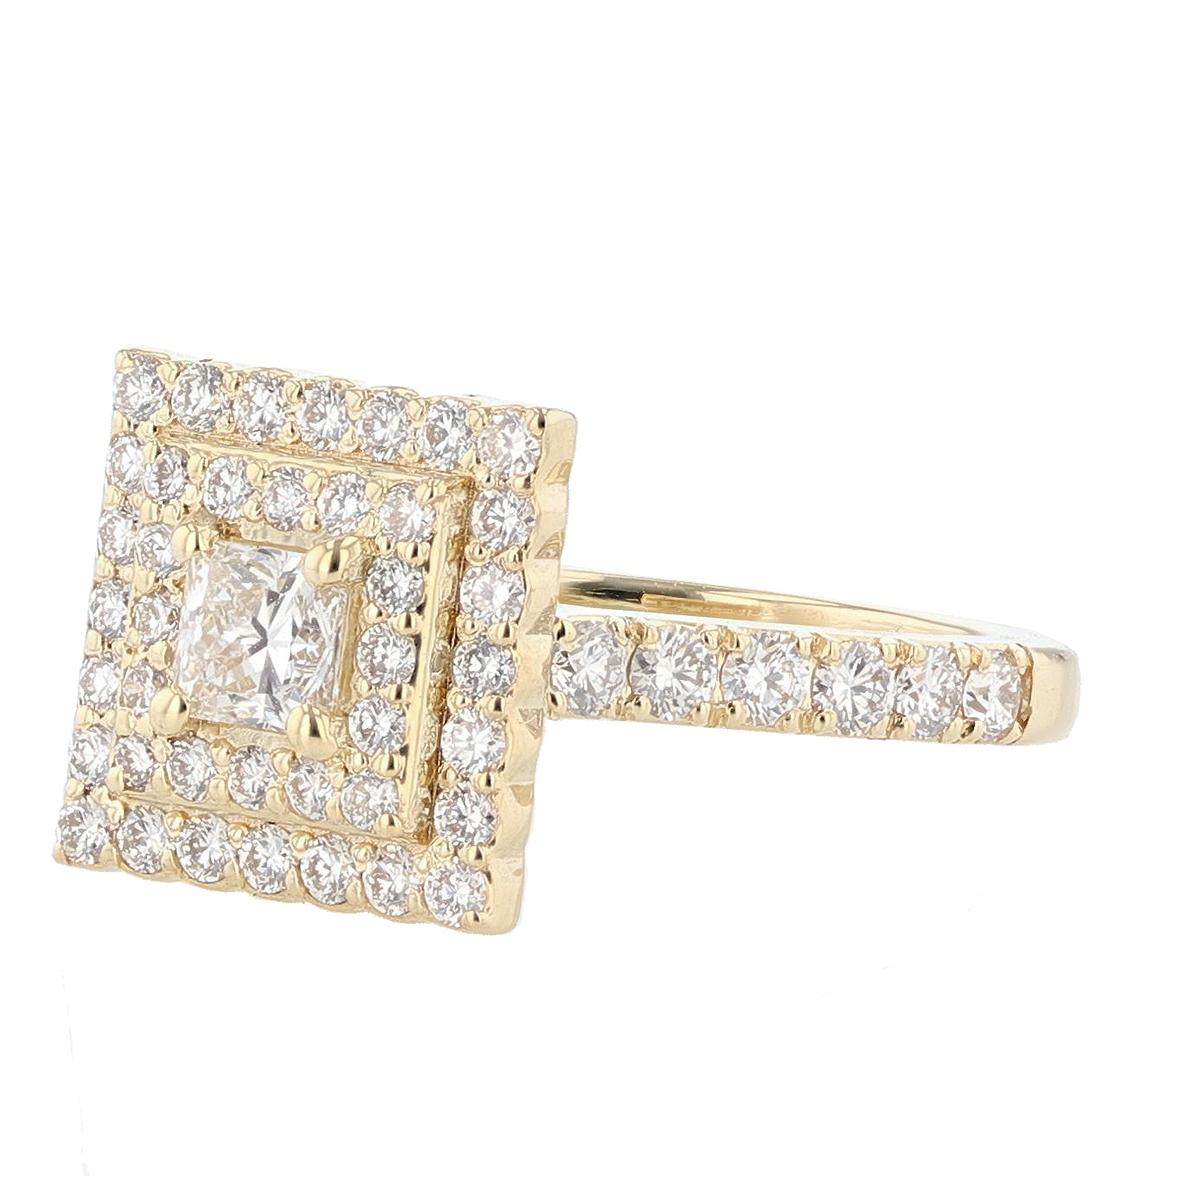 This ring is made with 14 karat yellow gold and features a prong set  0.40ct  EGL certified oval cut diamond (EGL Certificate number: 69876806D), with a color grade (E) and clarity grade (VS2) and is surrounded by 54 round cut diamonds weighing